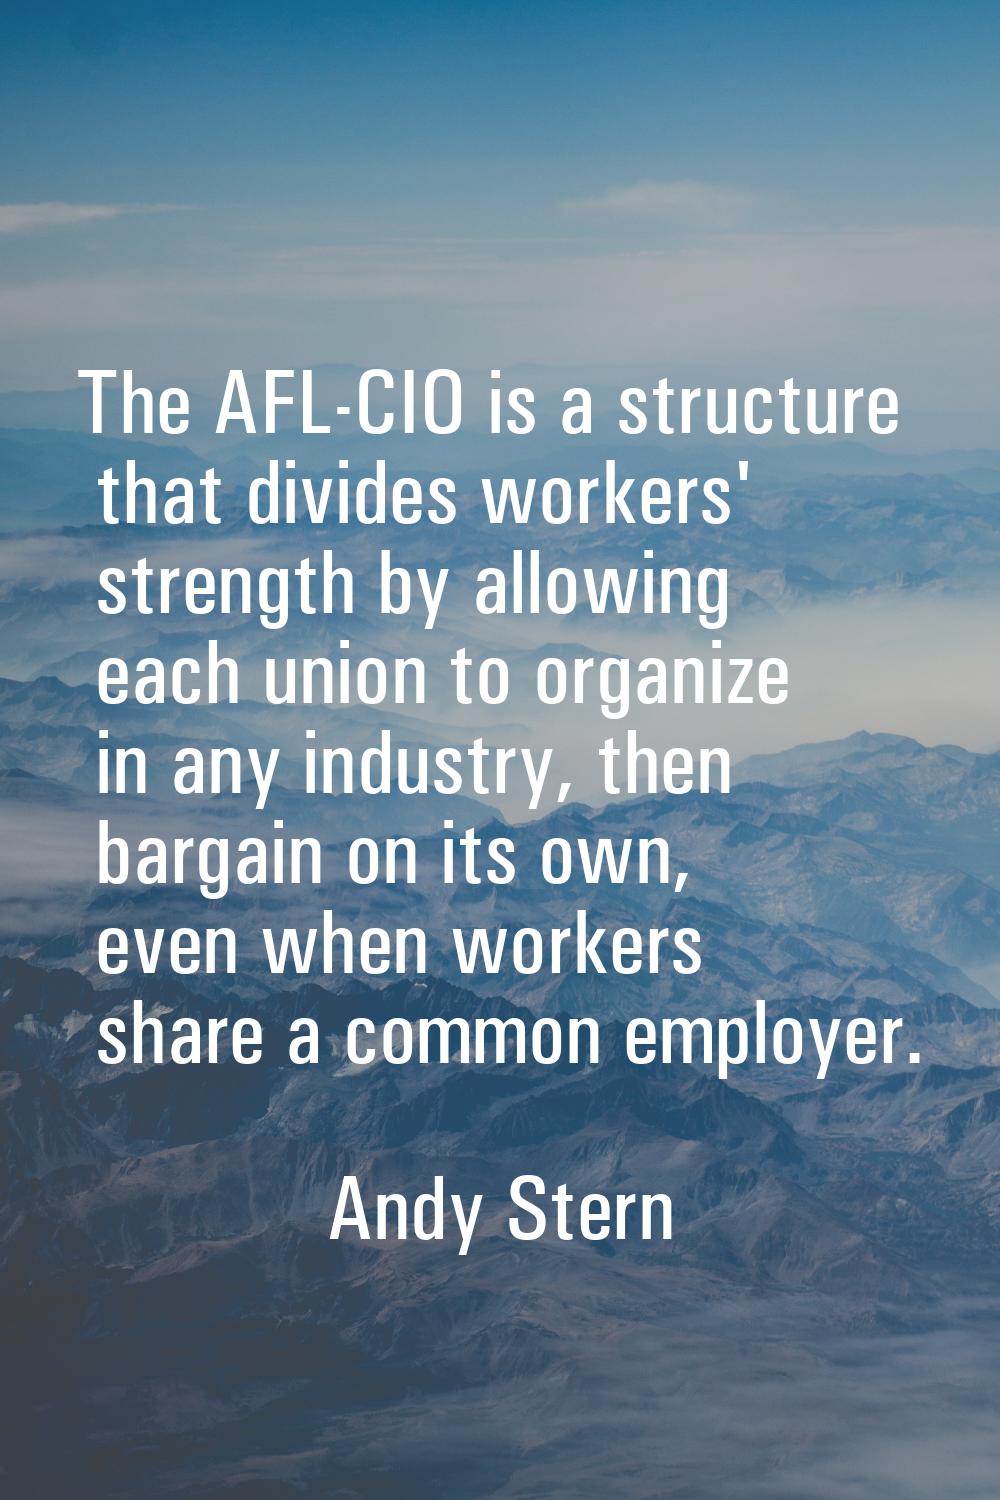 The AFL-CIO is a structure that divides workers' strength by allowing each union to organize in any